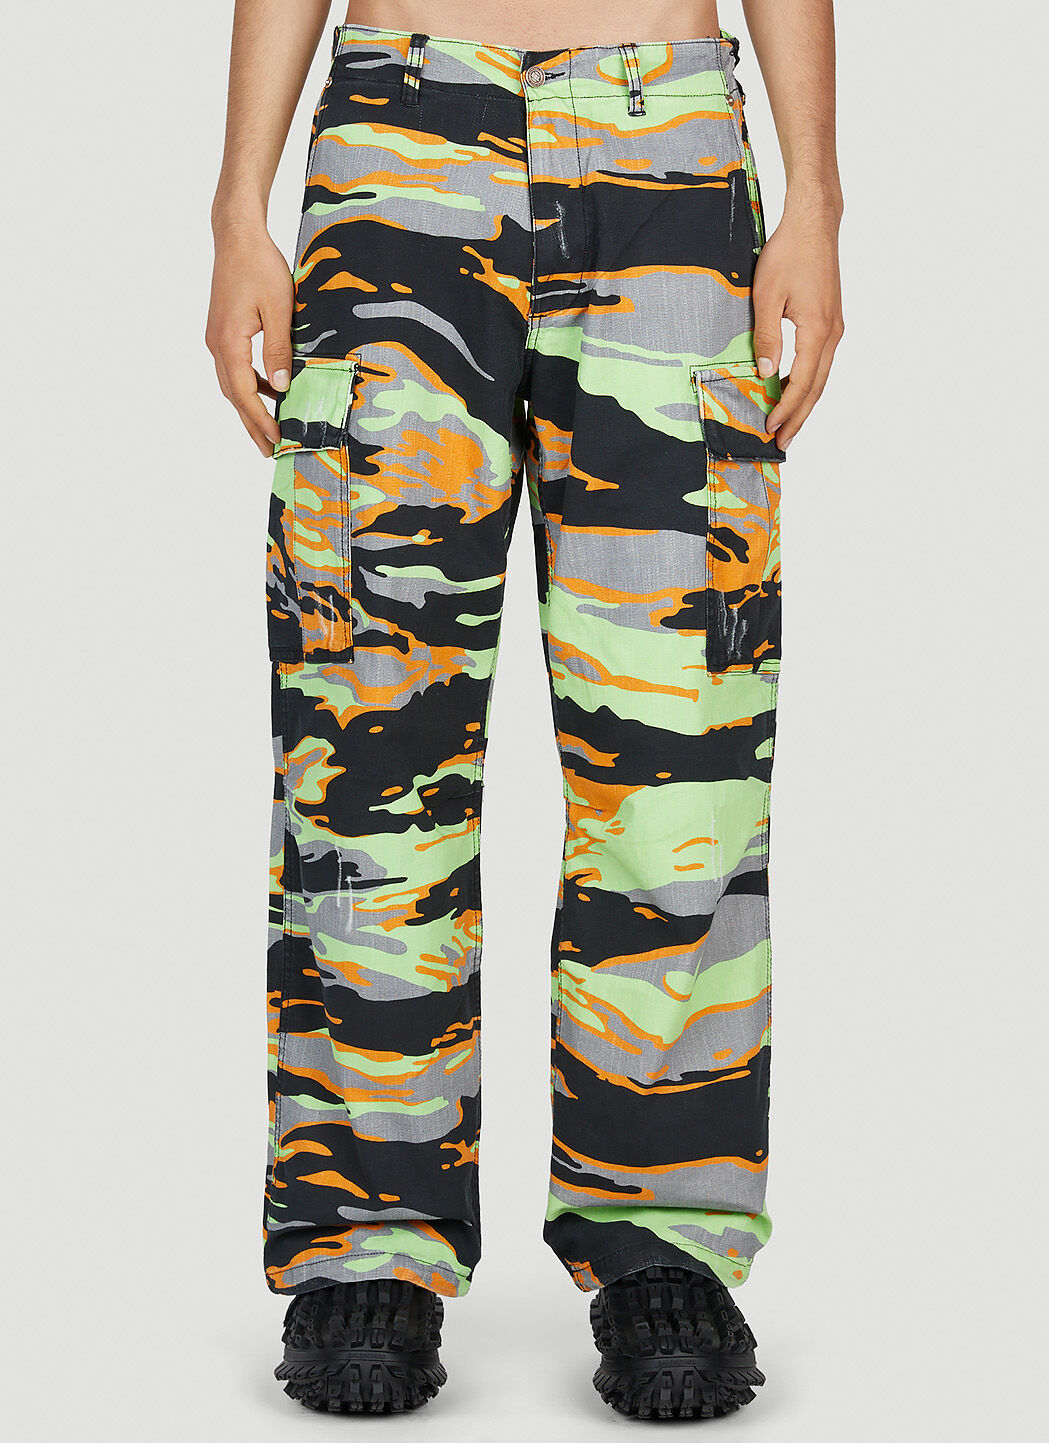 Digital Sky Blue Camouflage - Military BDU Pants - Cotton Polyester Twill -  Galaxy Army Navy